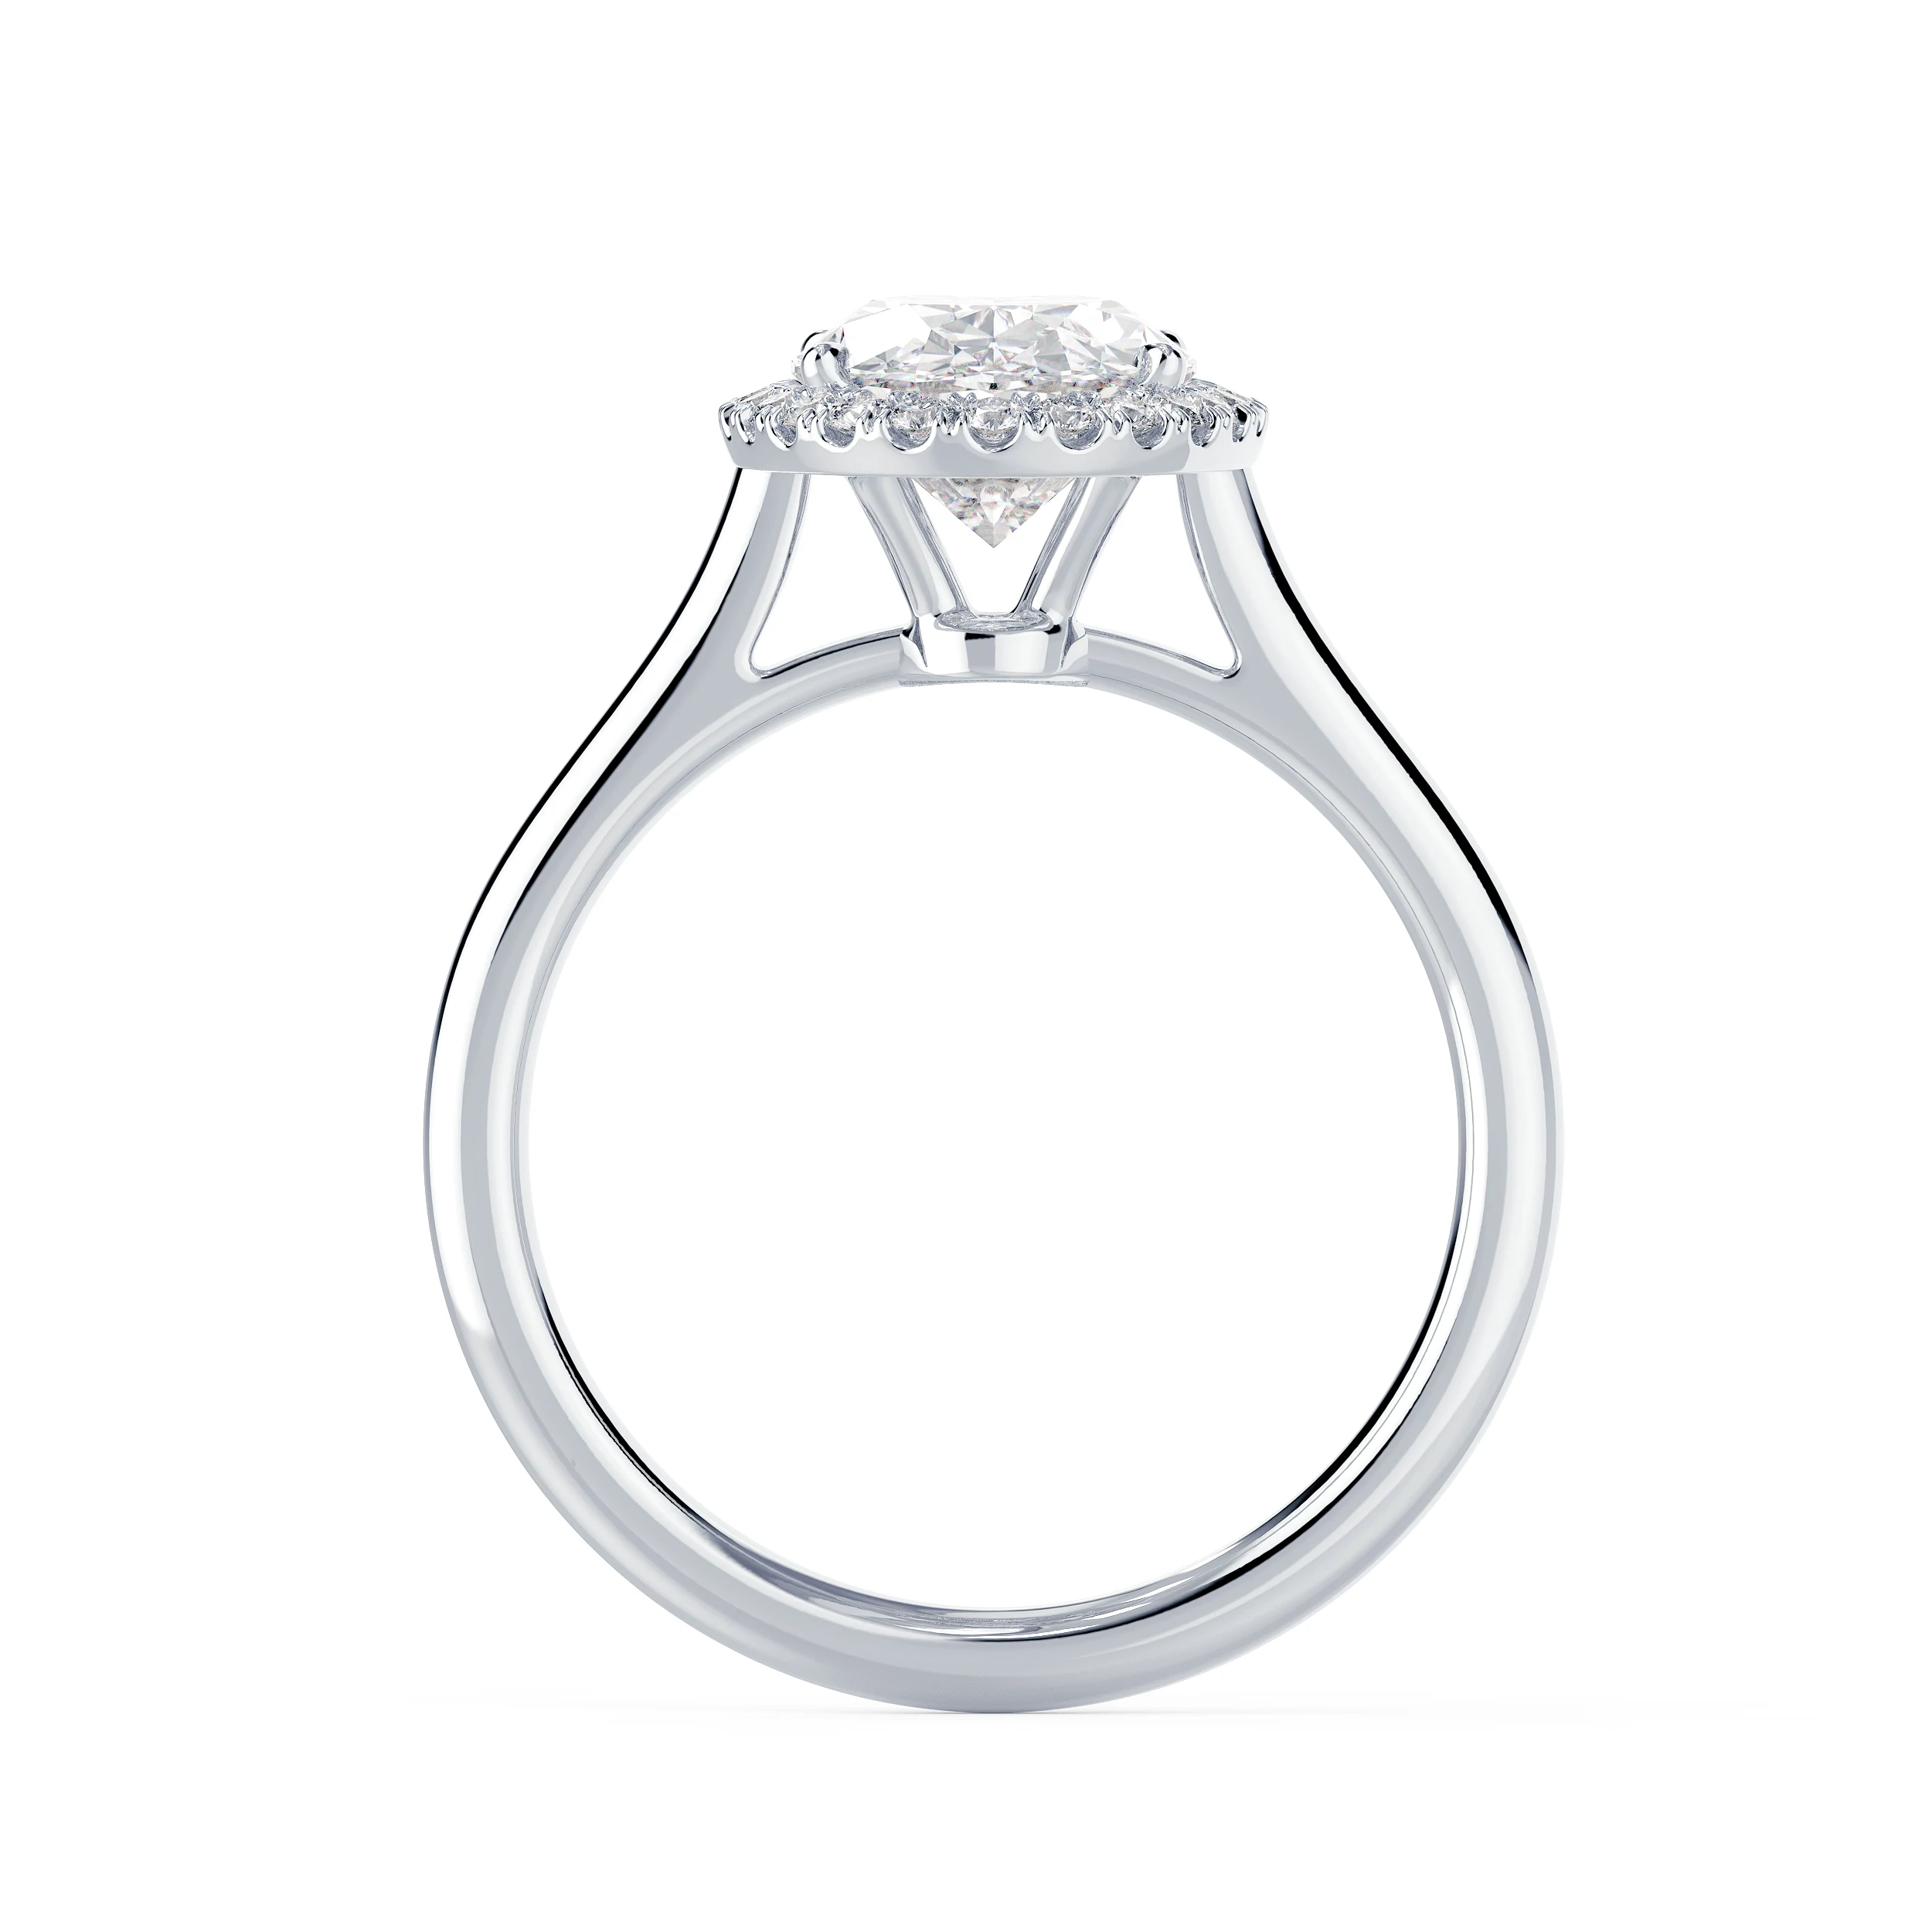 Exceptional Quality Lab Grown Diamonds set in White Gold Oval Single Halo Diamond Engagement Ring (Profile View)